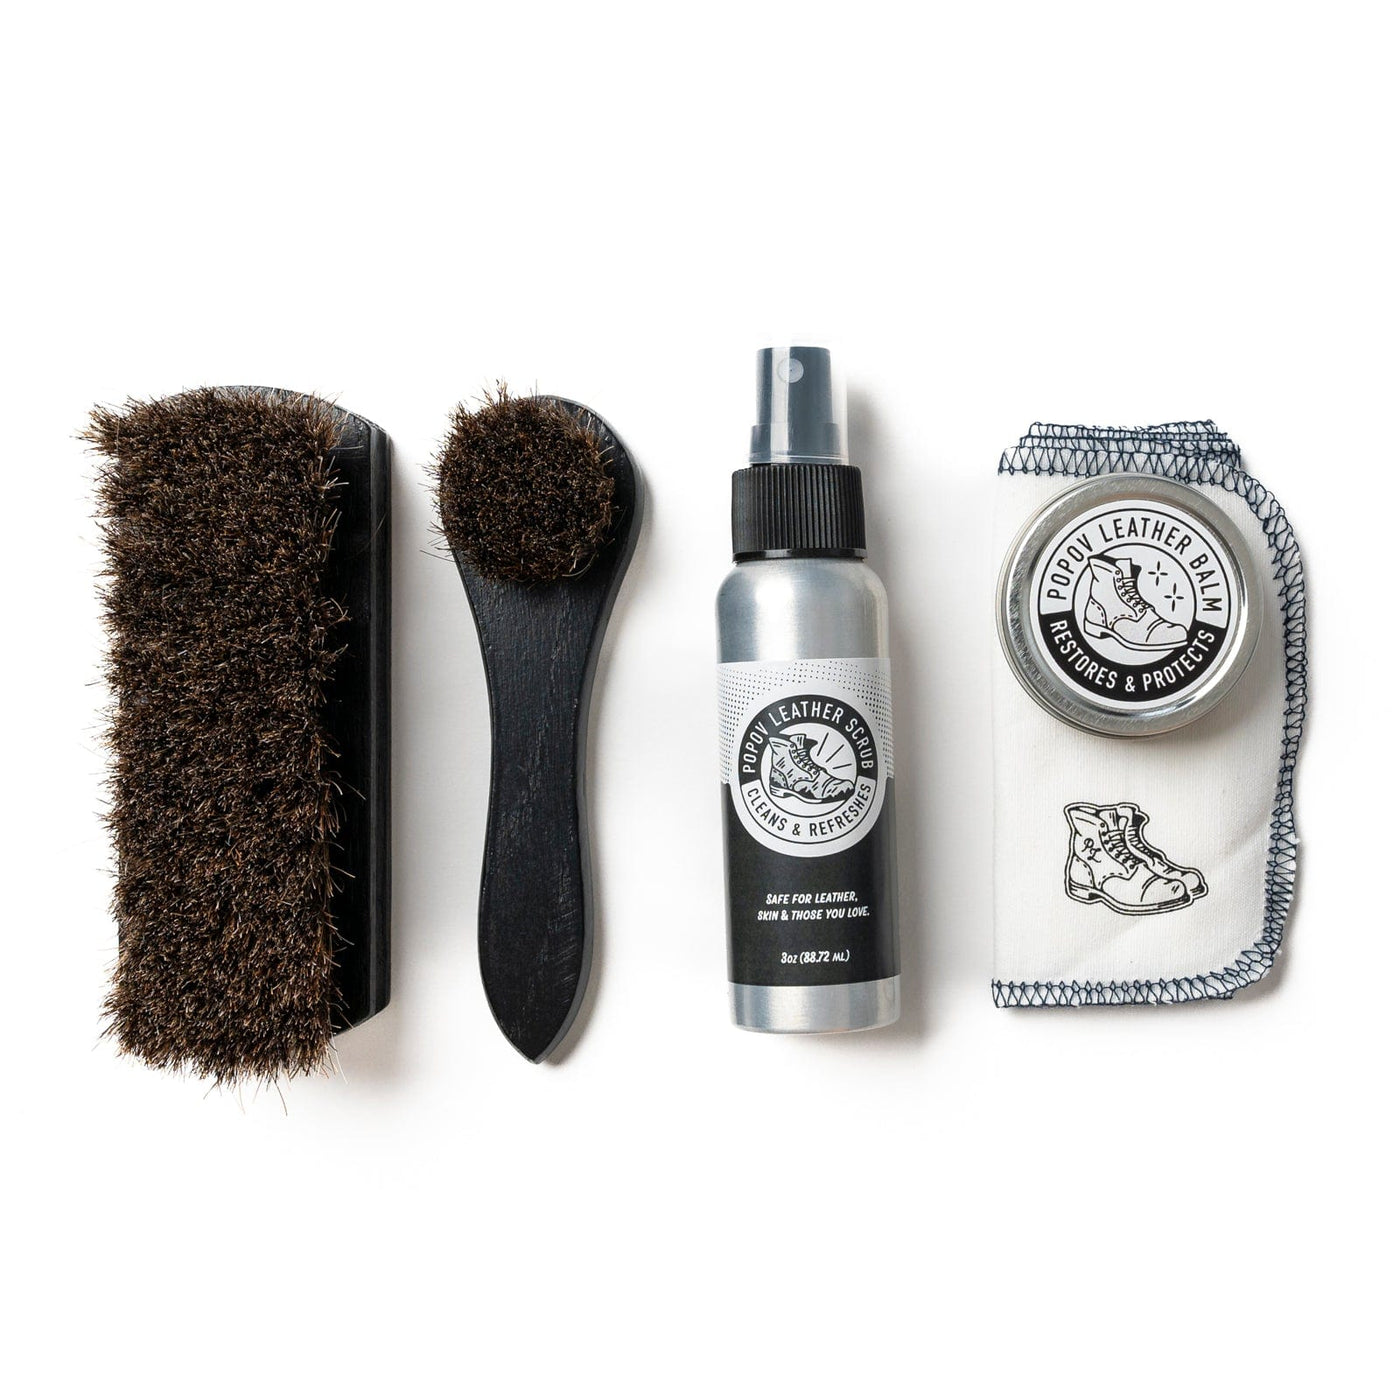 Popov Leather Boot Cleaning Kit Popov Leather